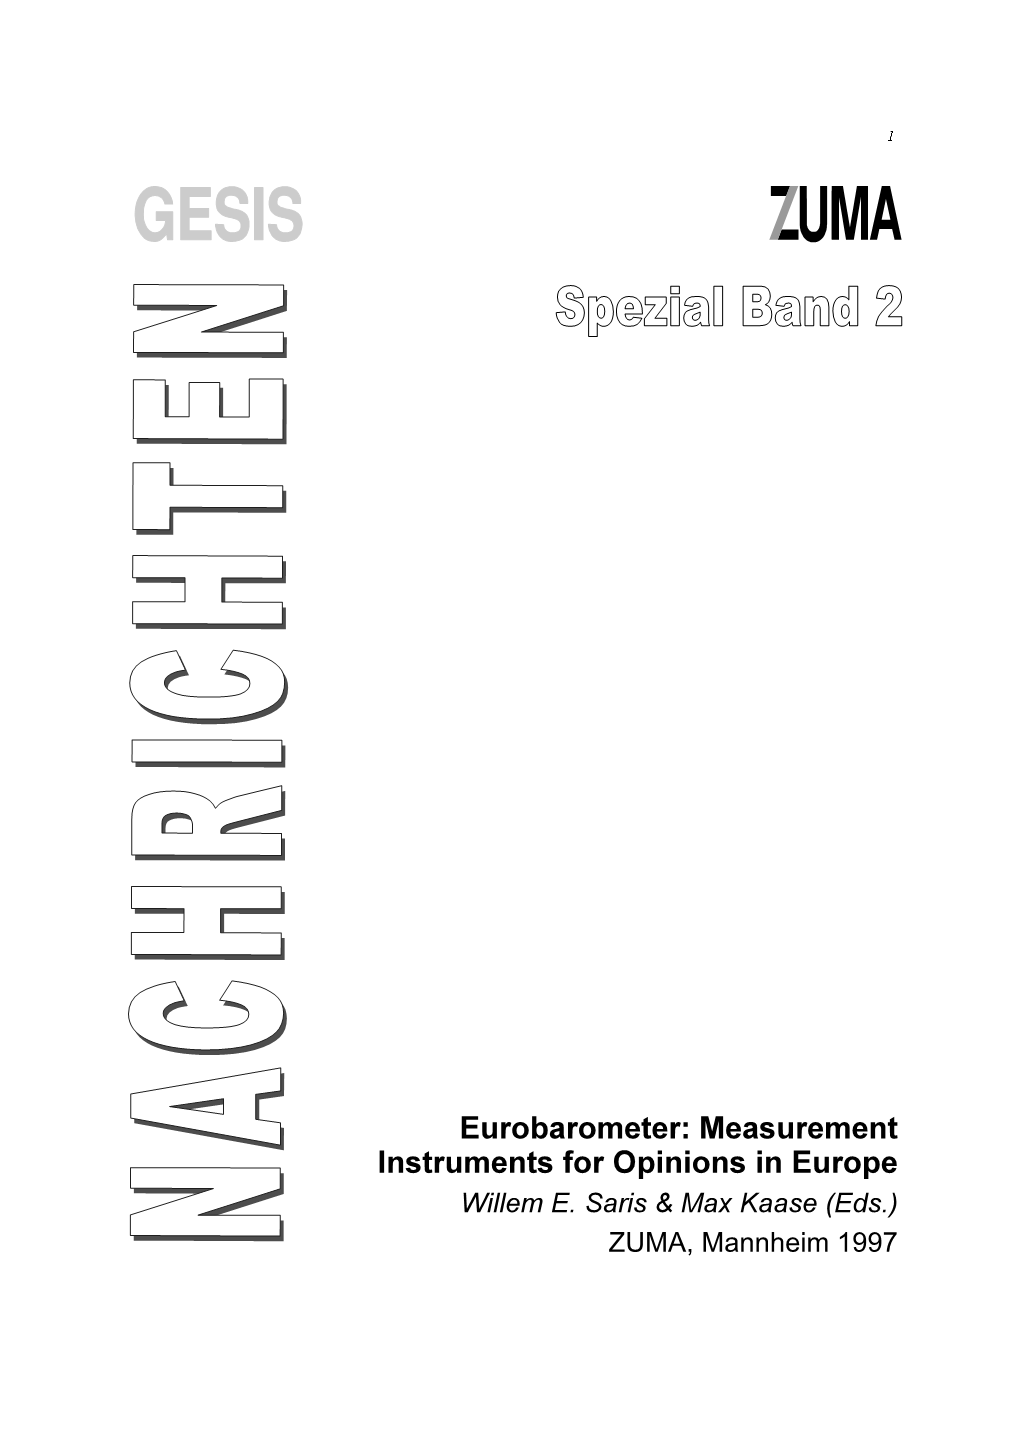 Measurement Instruments for Opinions in Europe